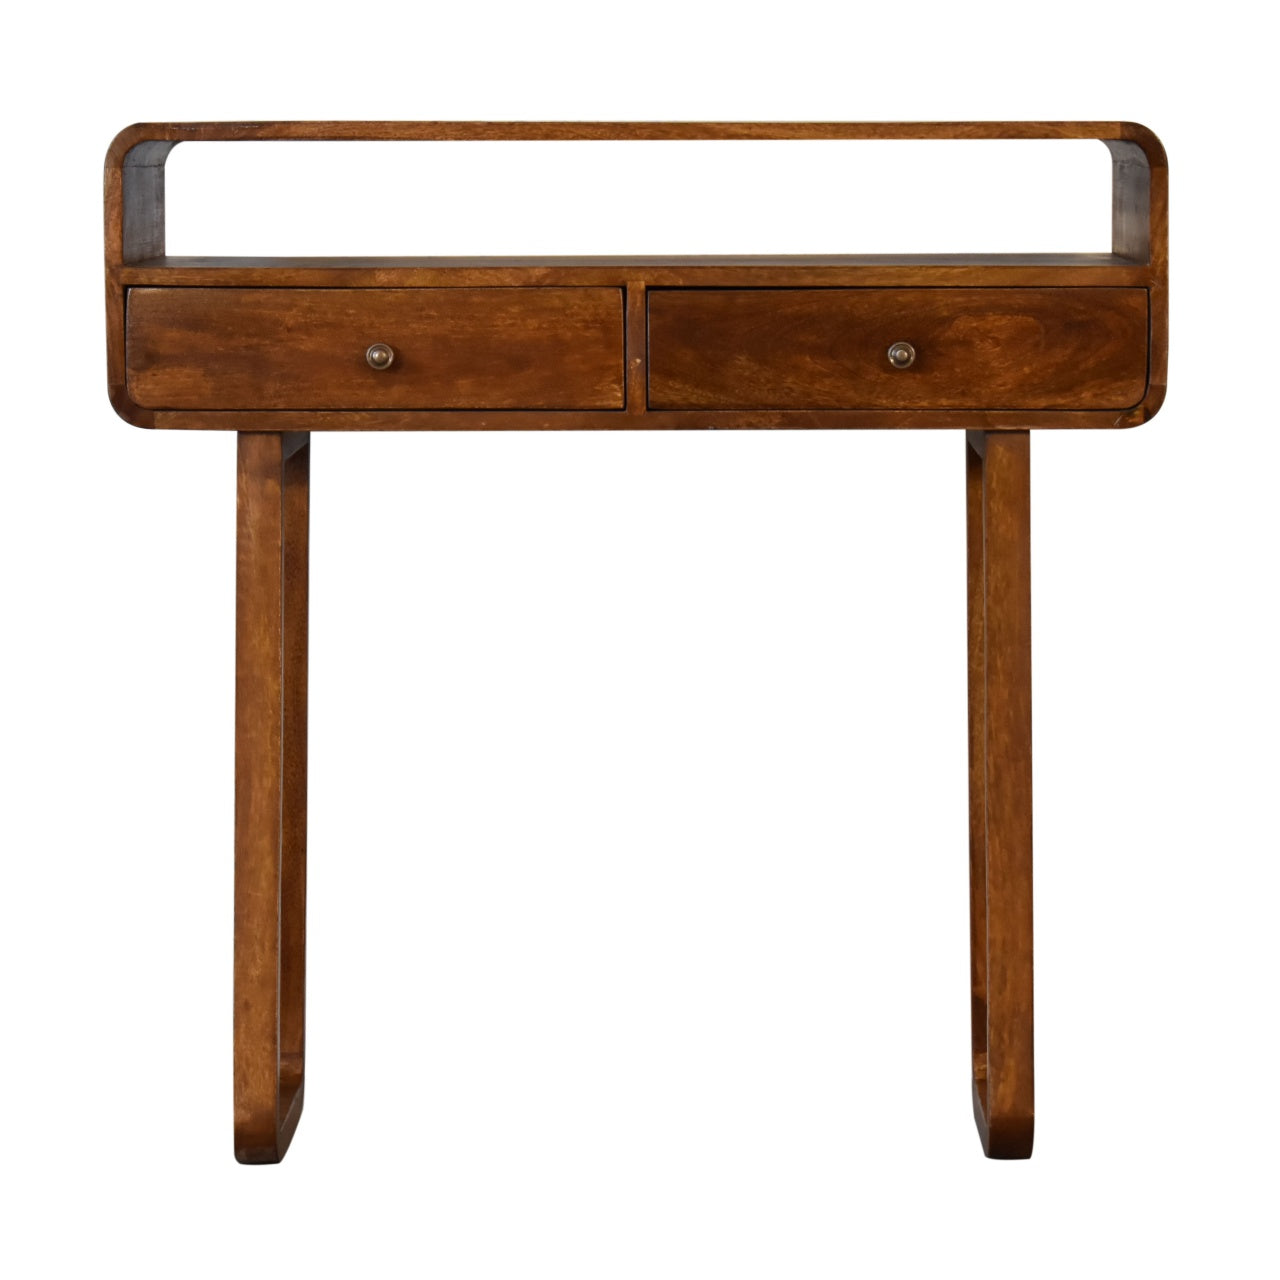 View UCurved Chestnut Console Table information